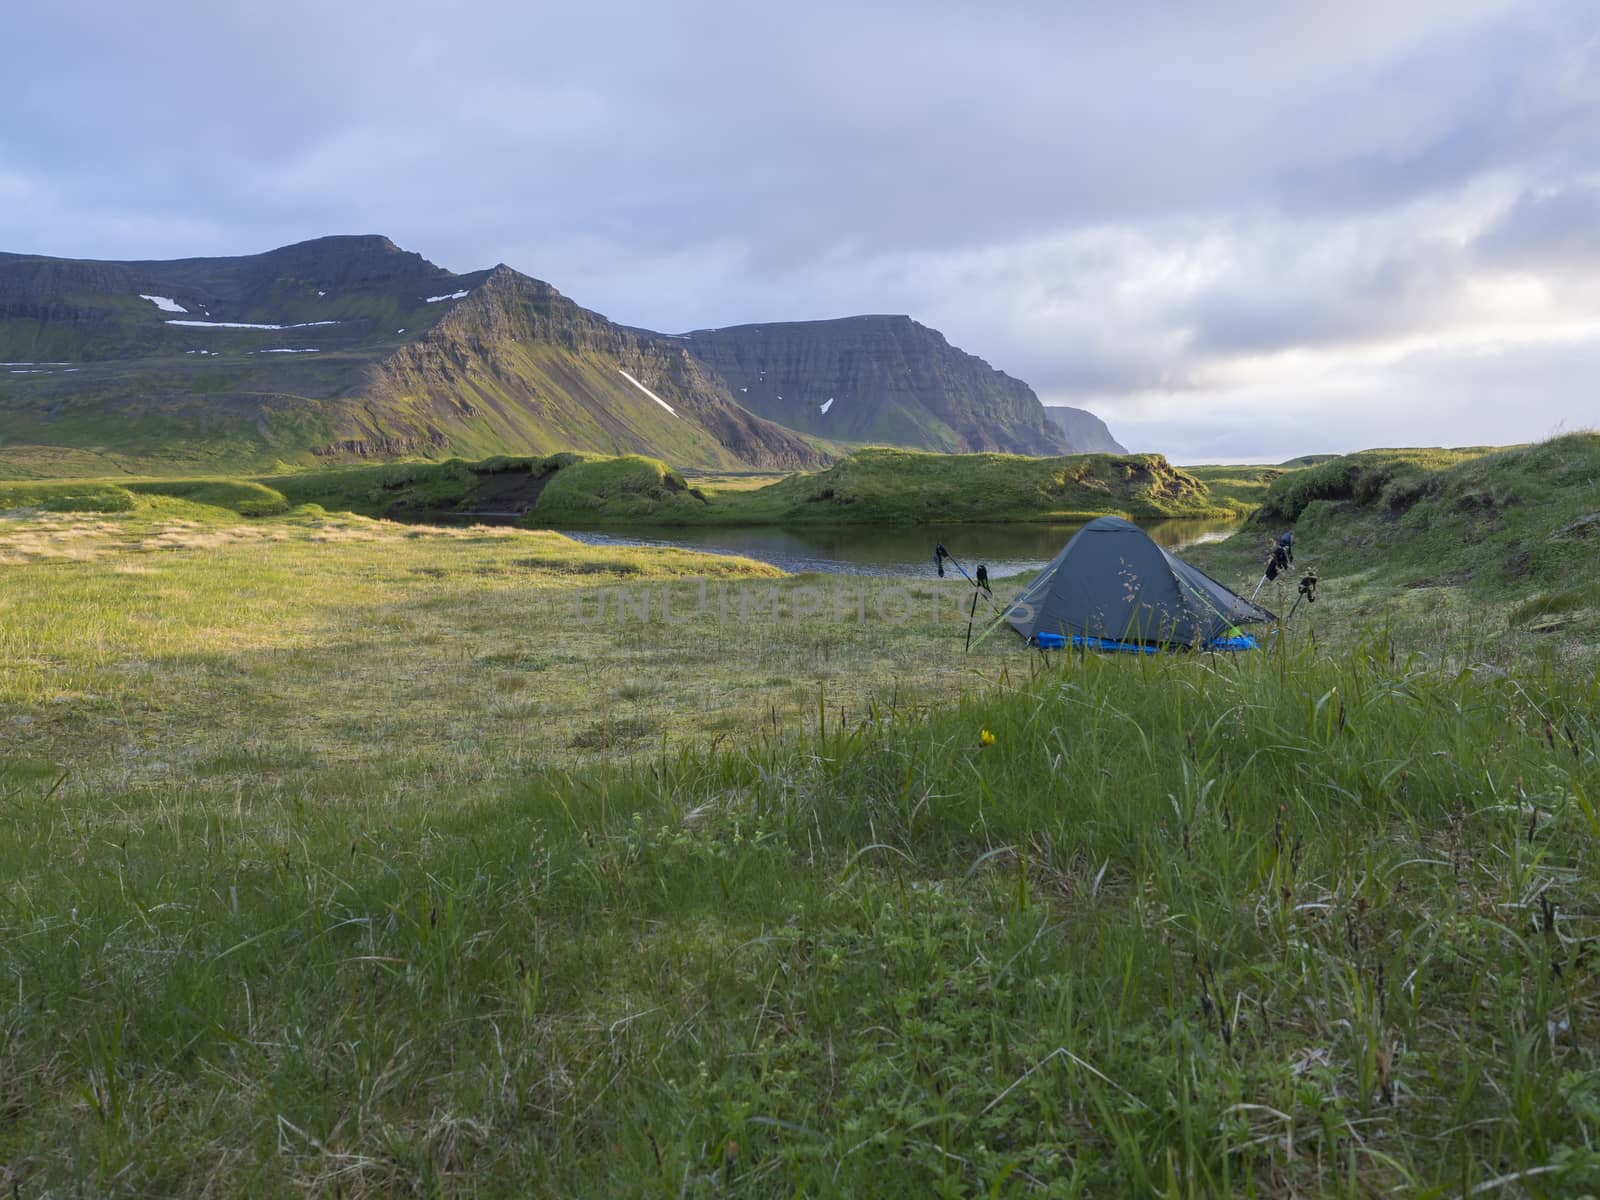 small blue tent standing alone on green grass on mossed creek banks in Hornstrandir Iceland, snow patched hills and cliffs, cloudy sky background, golden hour light, copy space.